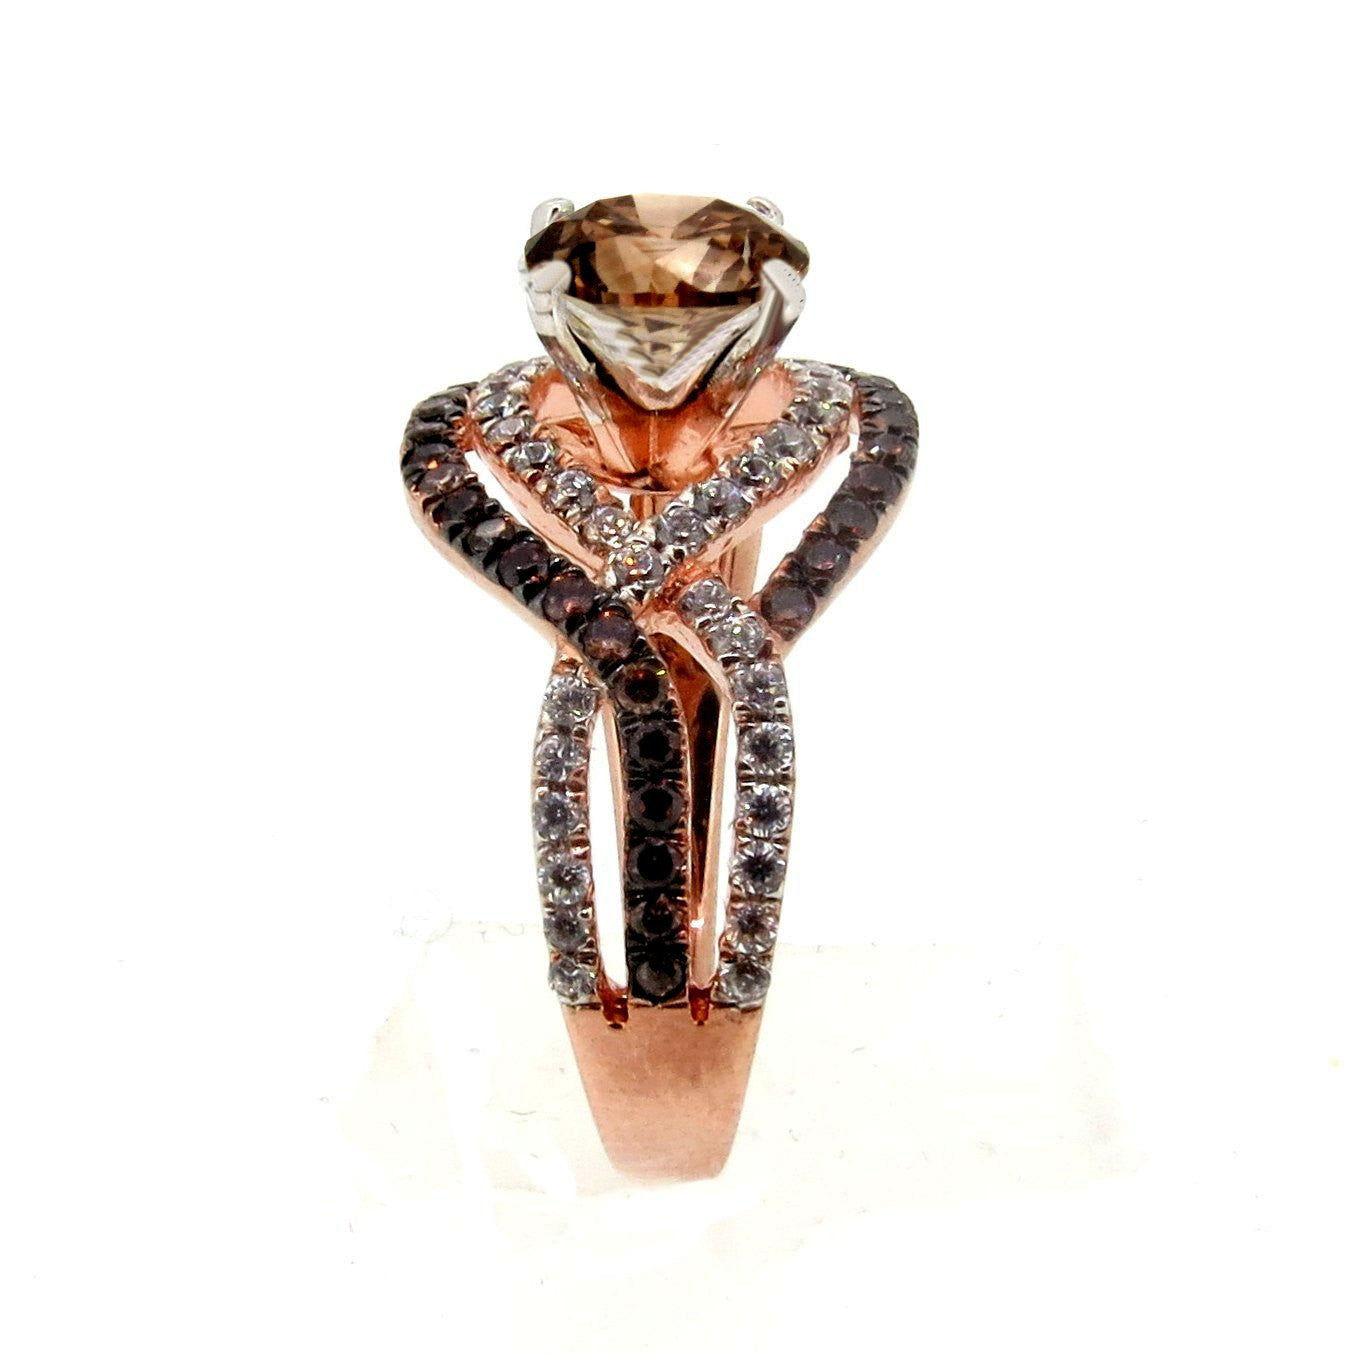 Unique Halo Infinity 1 Carat Fancy Brown Smoky Quartz Engagement Ring with Rose Gold, White & Brown Diamond Accent Stones, Anniversary Ring - SQ94645